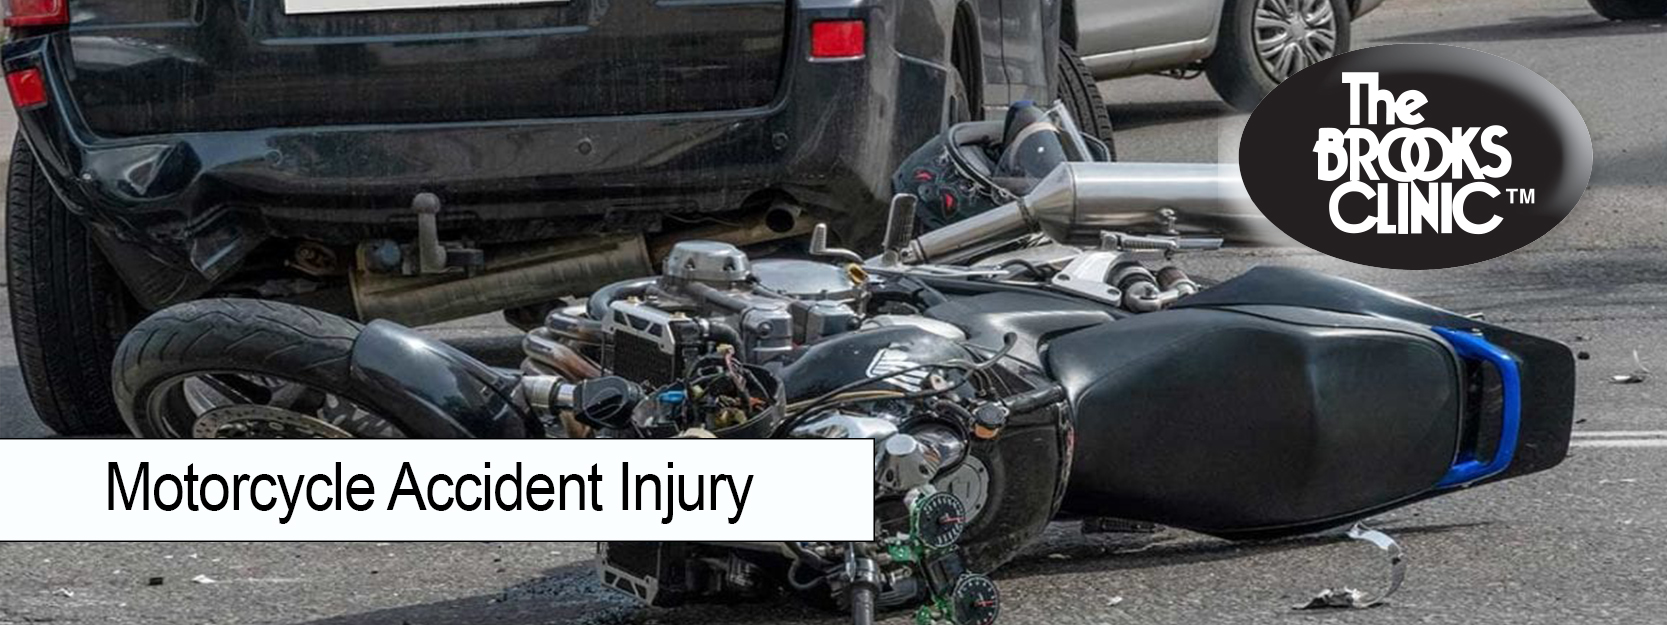 5 Ways To Prevent Motorcycle Related Accident Injury